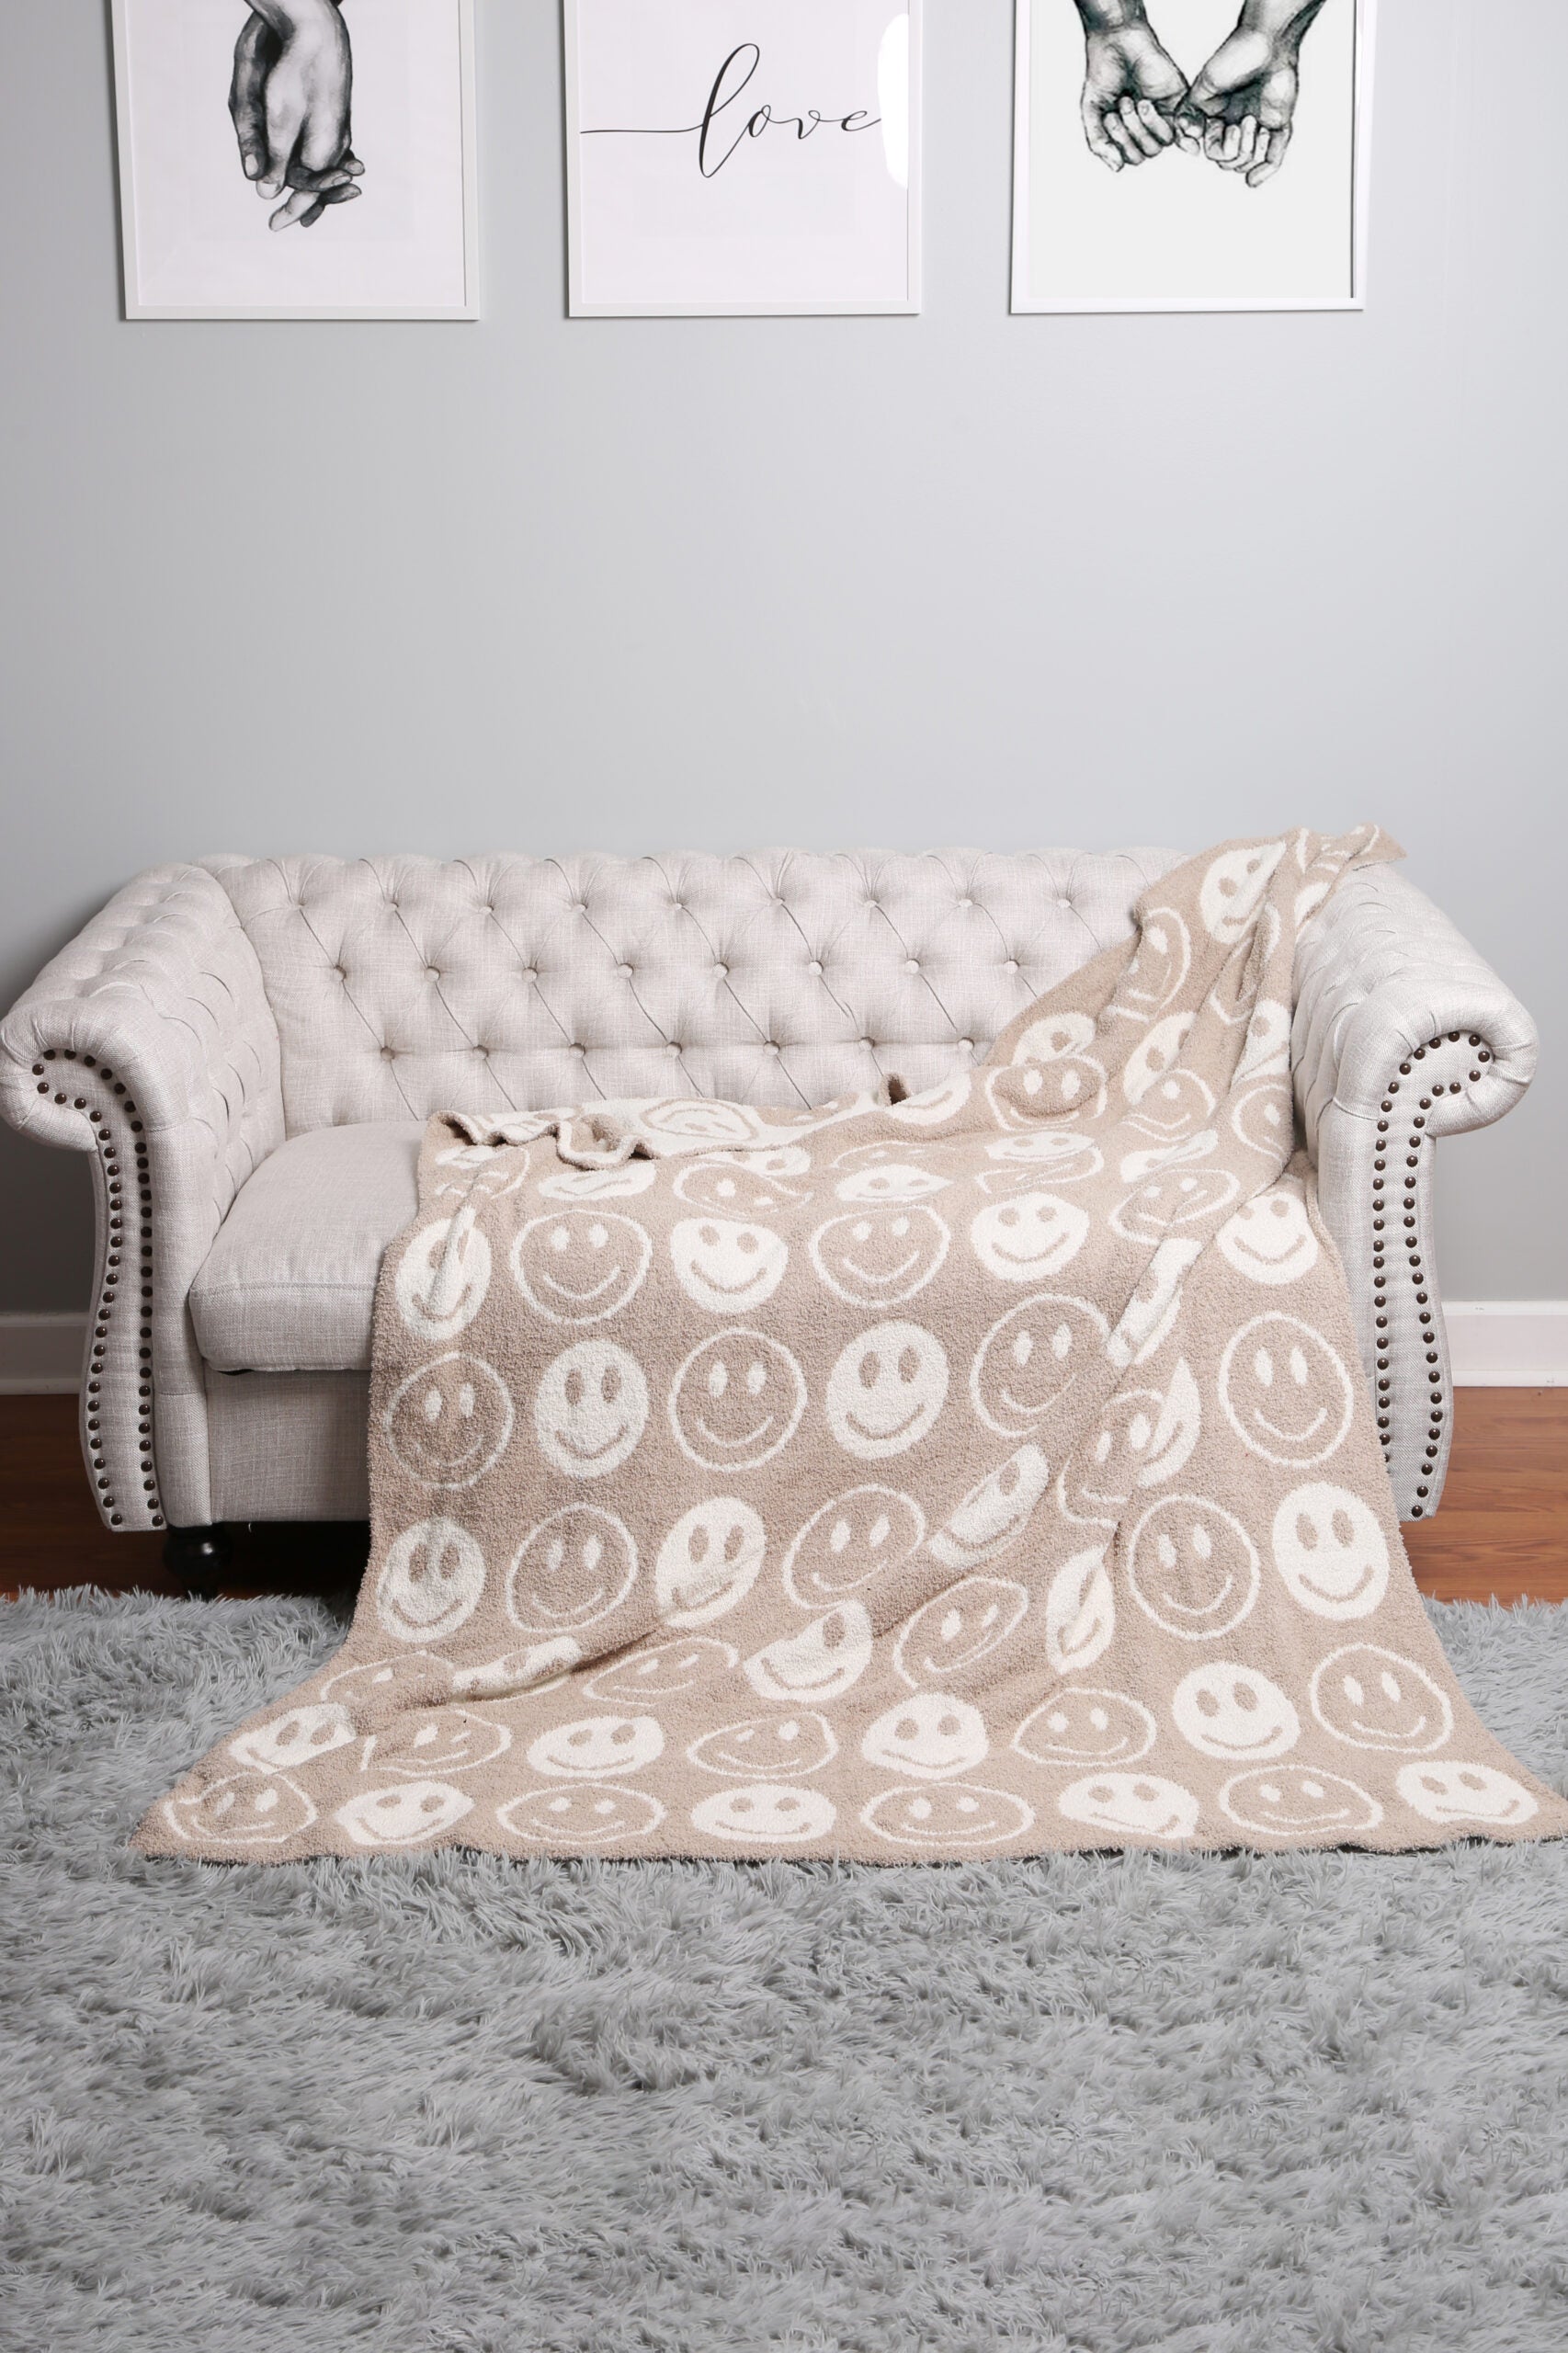 beige throw blanket draped over a grey couch.